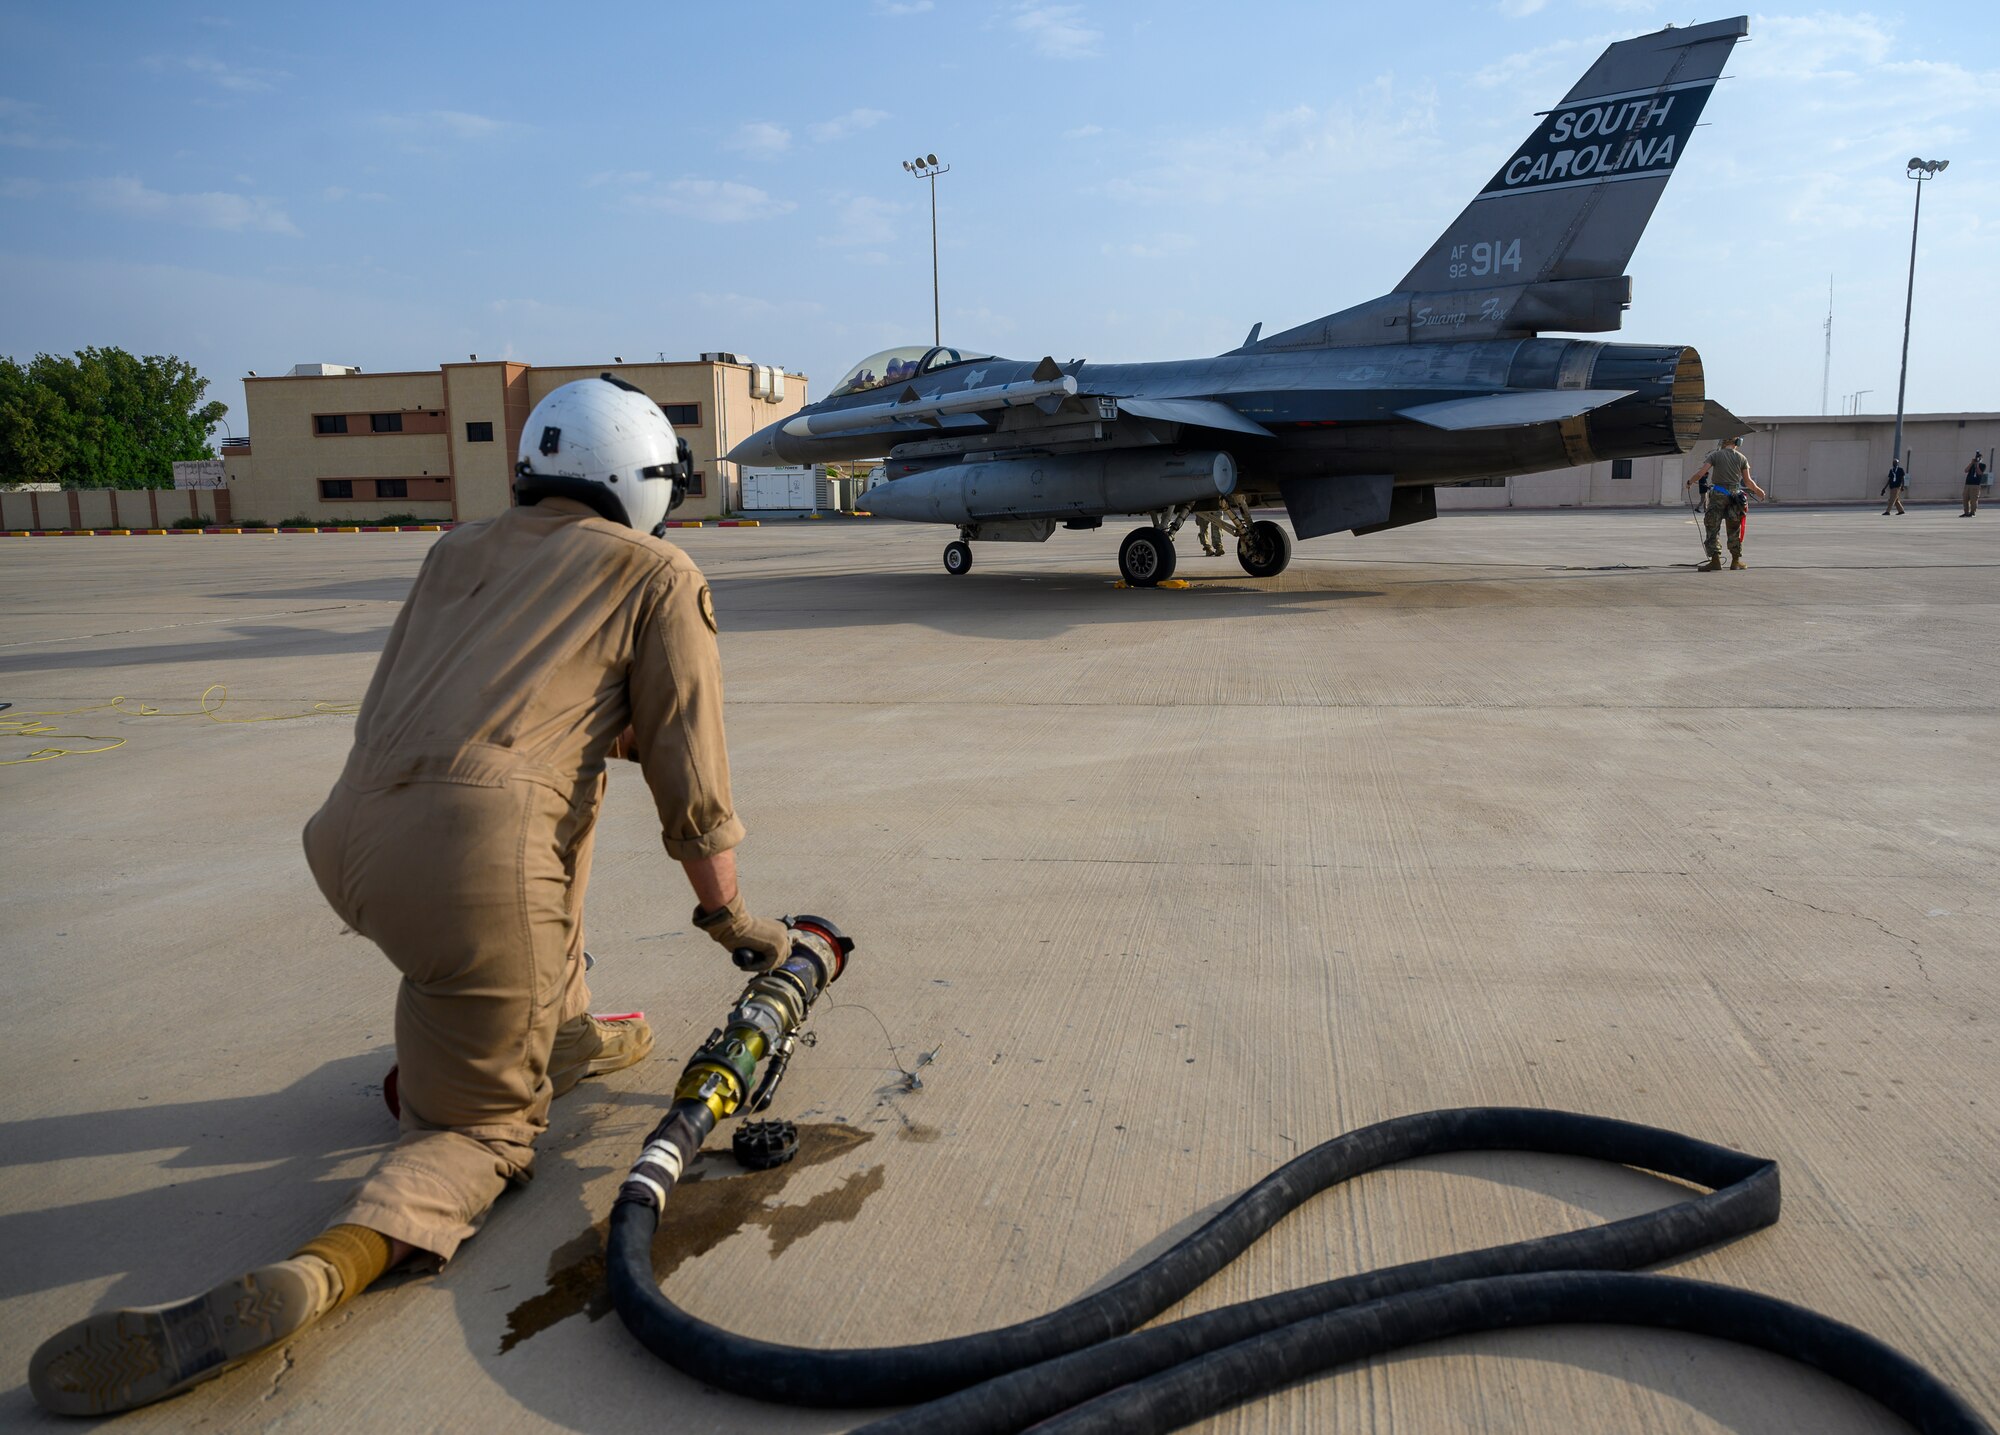 A U.S. Marine with Marine Aerial Refueler Transport Squadron 352, assigned to Special Purpose Marine Air-Ground Task Force – Crisis Response – Central Command, prepares to conduct a “hot pit” aircraft-to-aircraft refueling of a U.S. Air Force F-16 Fighting Falcon during a counter unmanned aerial system integration mission with joint and Royal Saudi aircraft at a forward location in the Kingdom of Saudi Arabia, June 30, 2021. U.S. Air Forces Central aircraft regularly work with coalition and partner nations to test their collective counter-UAS capabilities to ensure the security and stability of regional airspace. (U.S. Air Force photo by Senior Airman Samuel Earick)